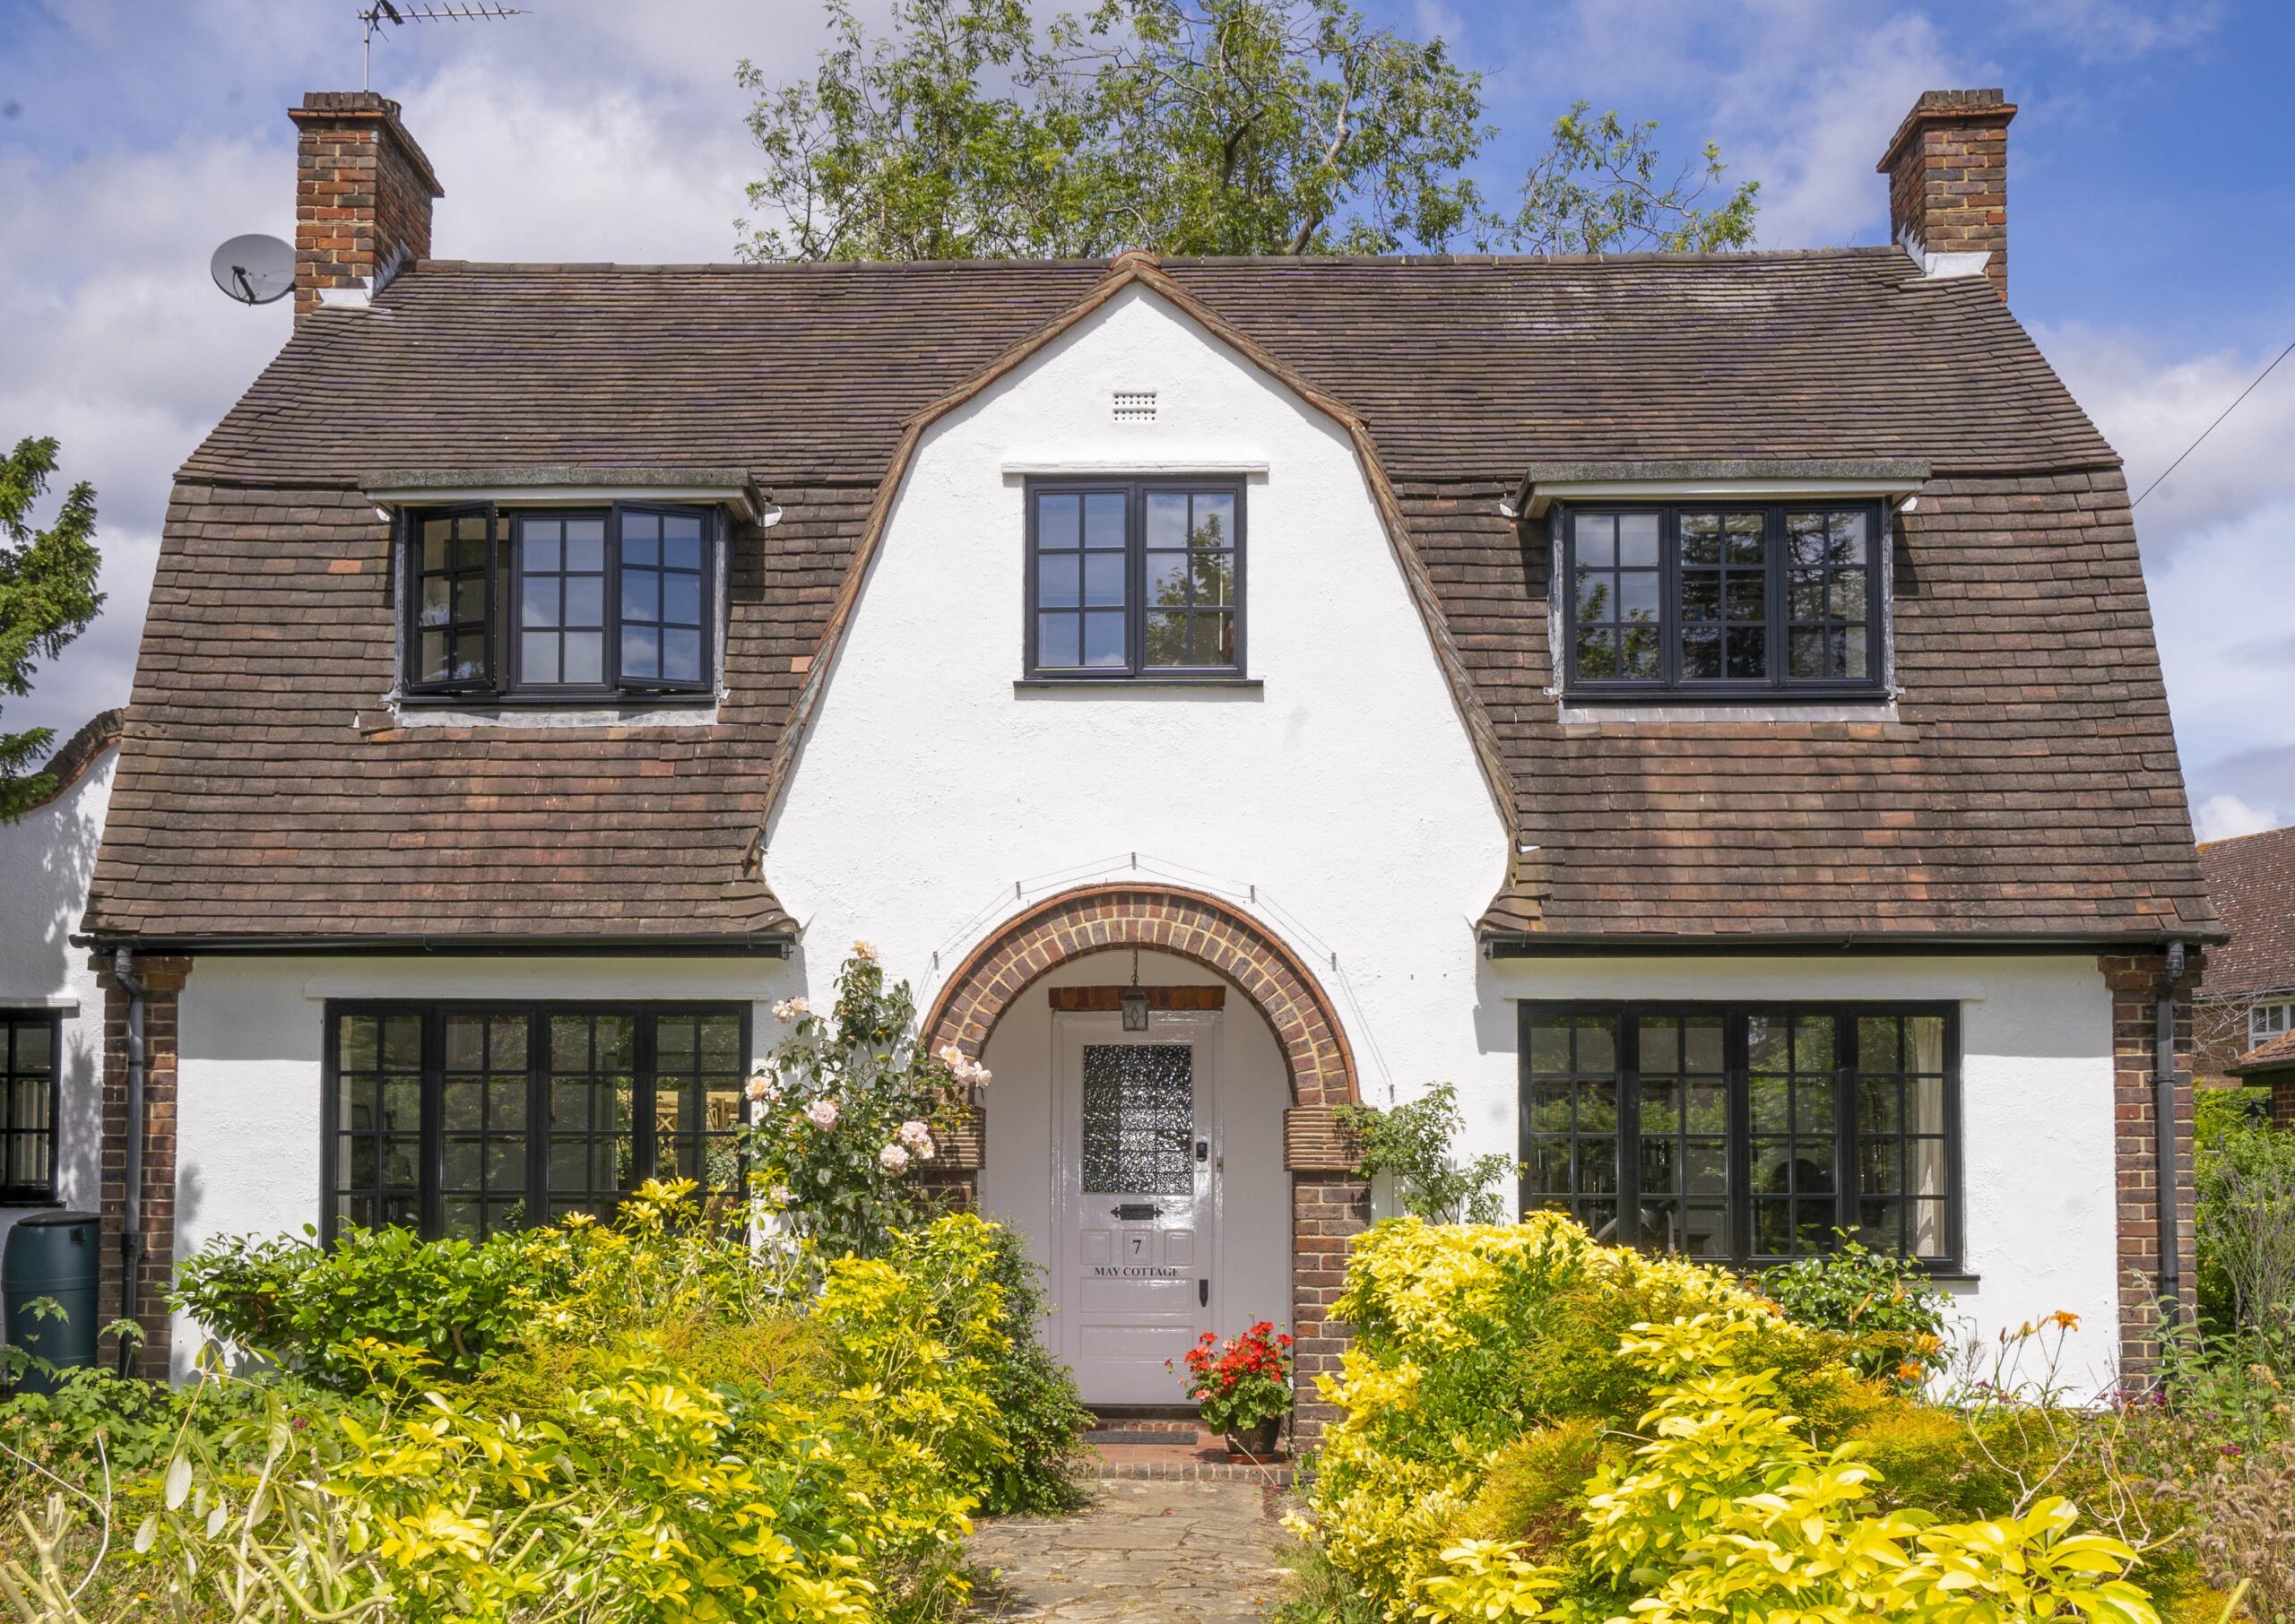 Noise Reduction Heritage Windows for a Charming Cottage, Walton-On-Thames